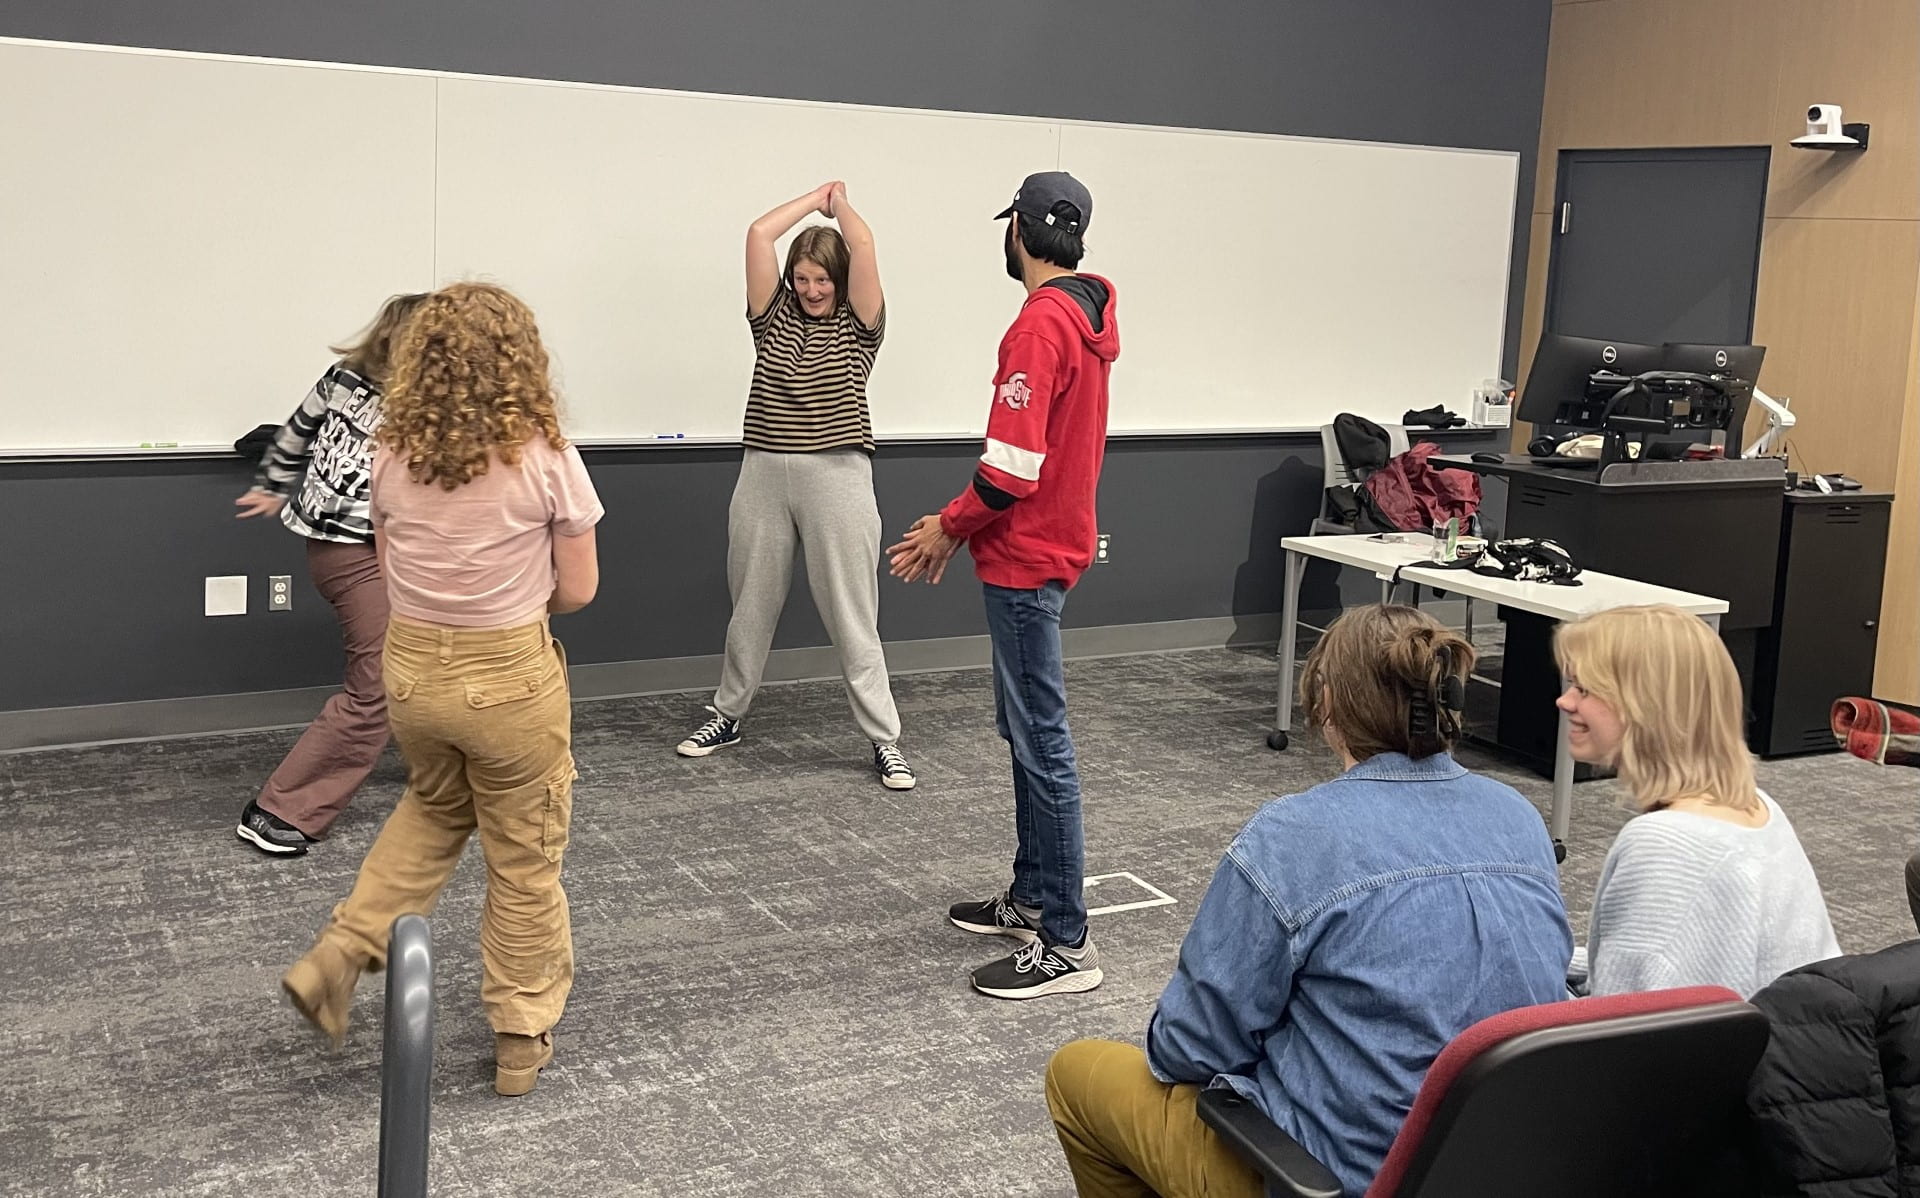 Members of Fishbowl Improvisational Comedy Group warm up before a practice for the upcoming Tides Improv Comedy Festival, which will take place this weekend in the Ohio Union's U.S. Bank Conference Theater. Credit: Avery Caudill | Lantern Reporter